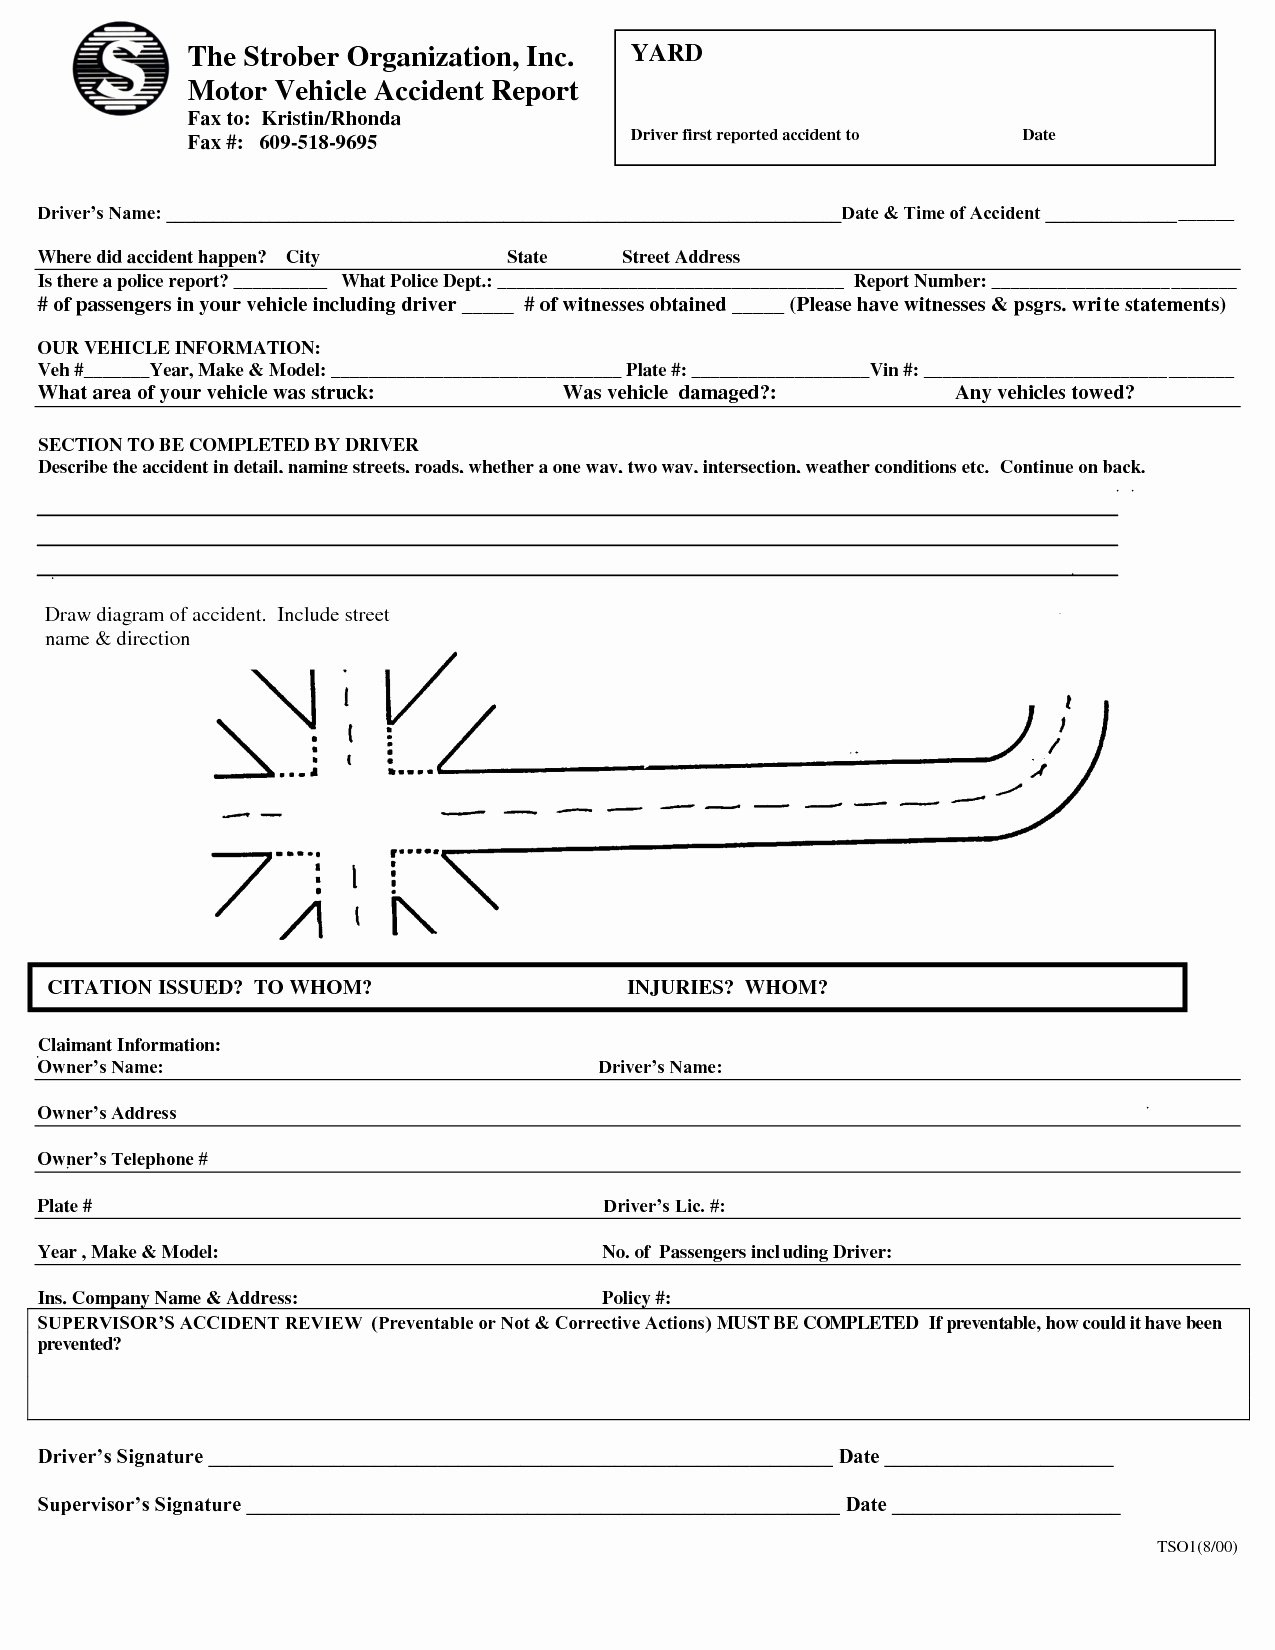 Vehicle Accident Report form Template Fresh Fake Police Report Car Accident